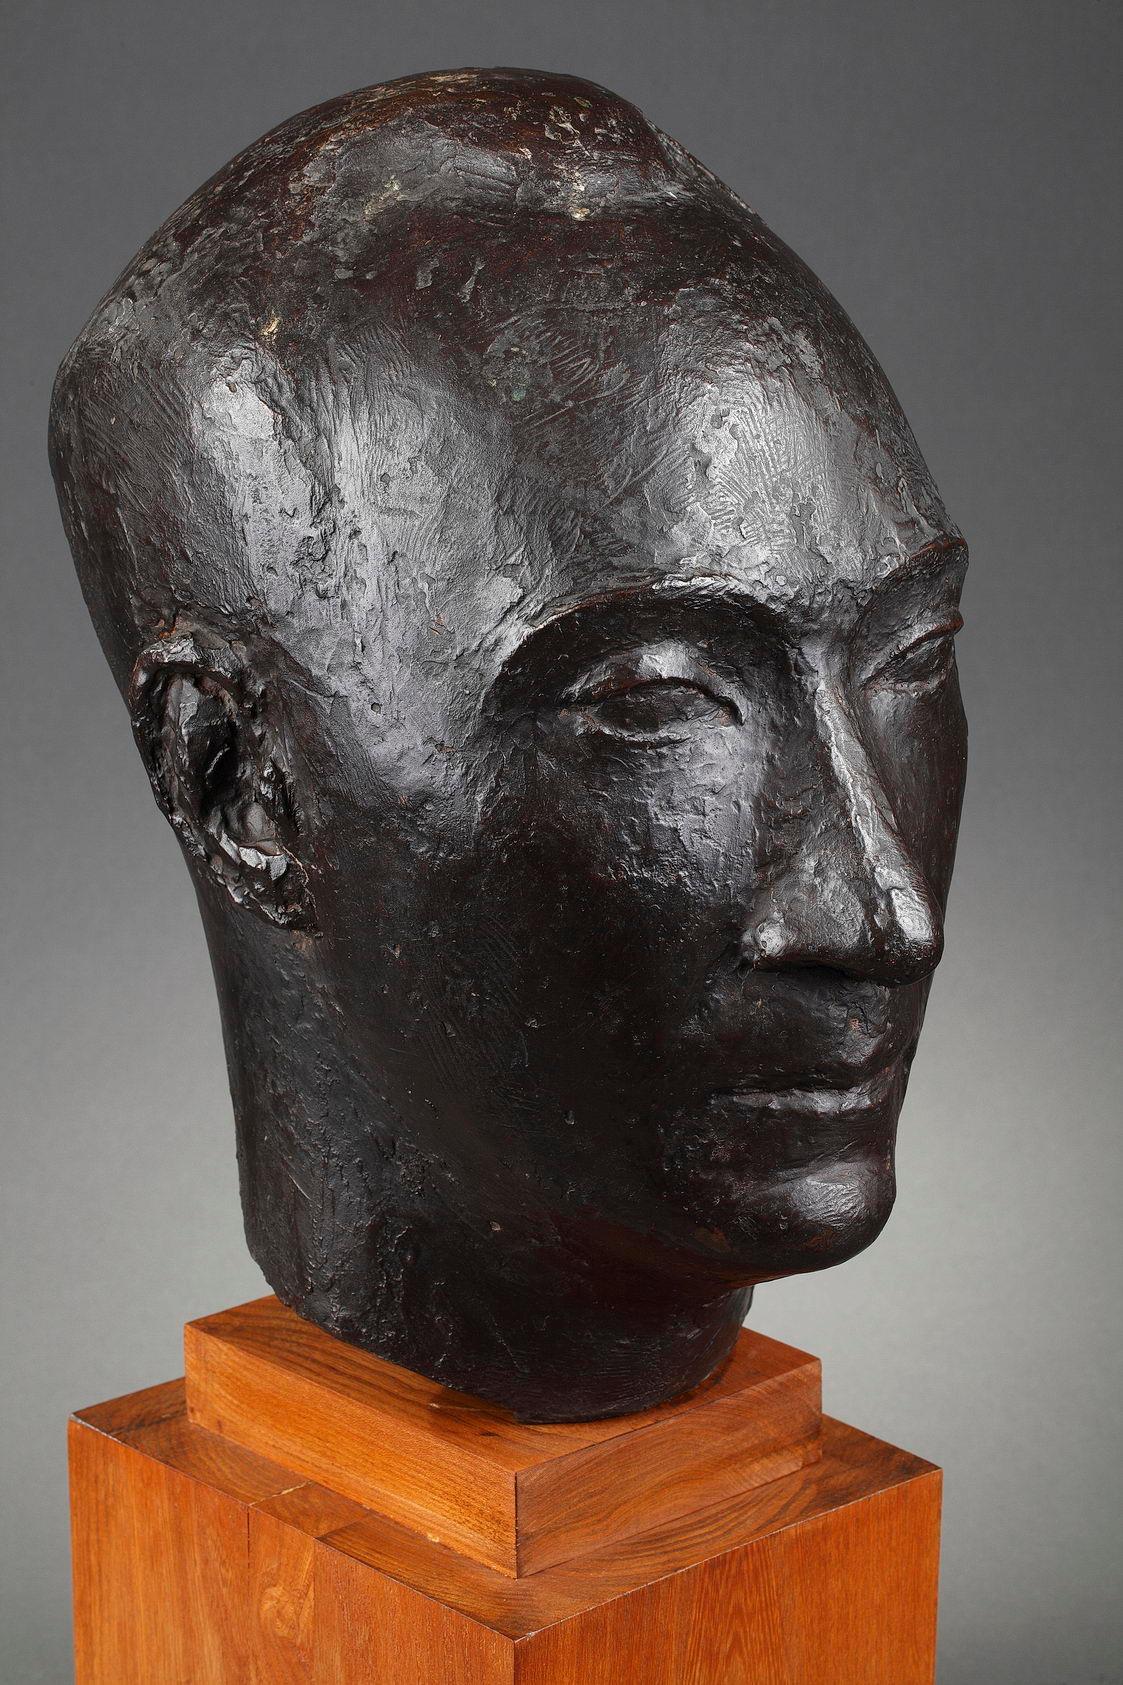 Portrait of Pierre Vérité
by Marcel GIMOND (1894-1961)

Bronze sculpture with a dark brown patina
signed on the neck 